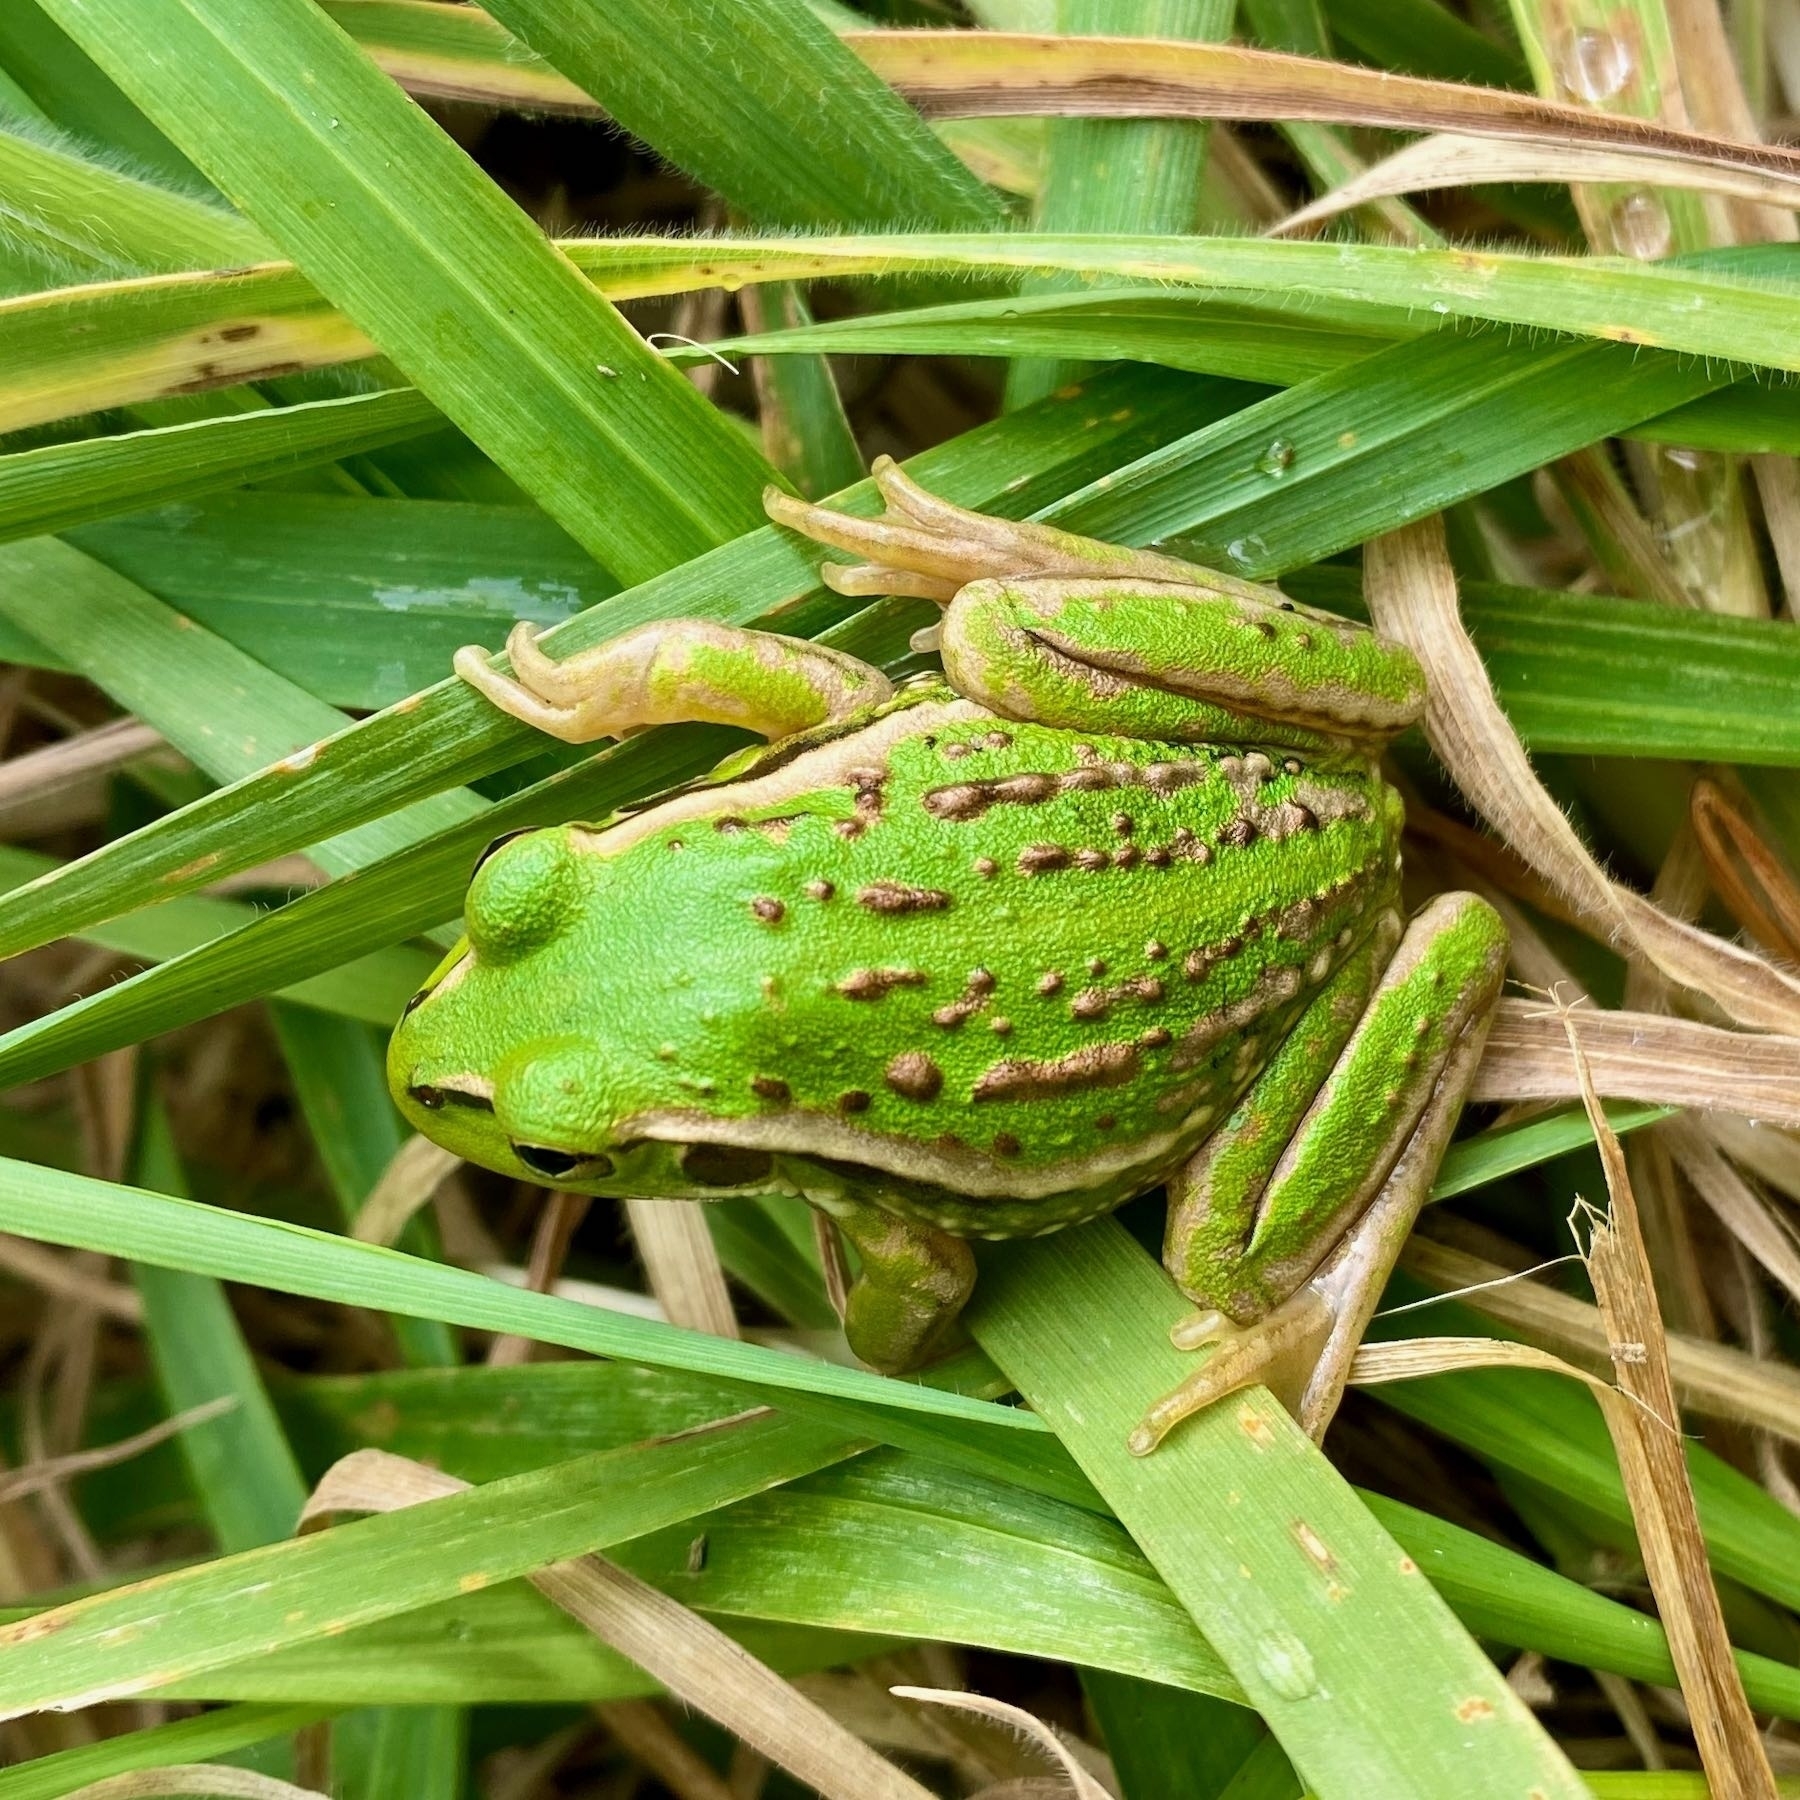 Small bright green frog with golden stripes and bumps, on grass. Better view of its back. 